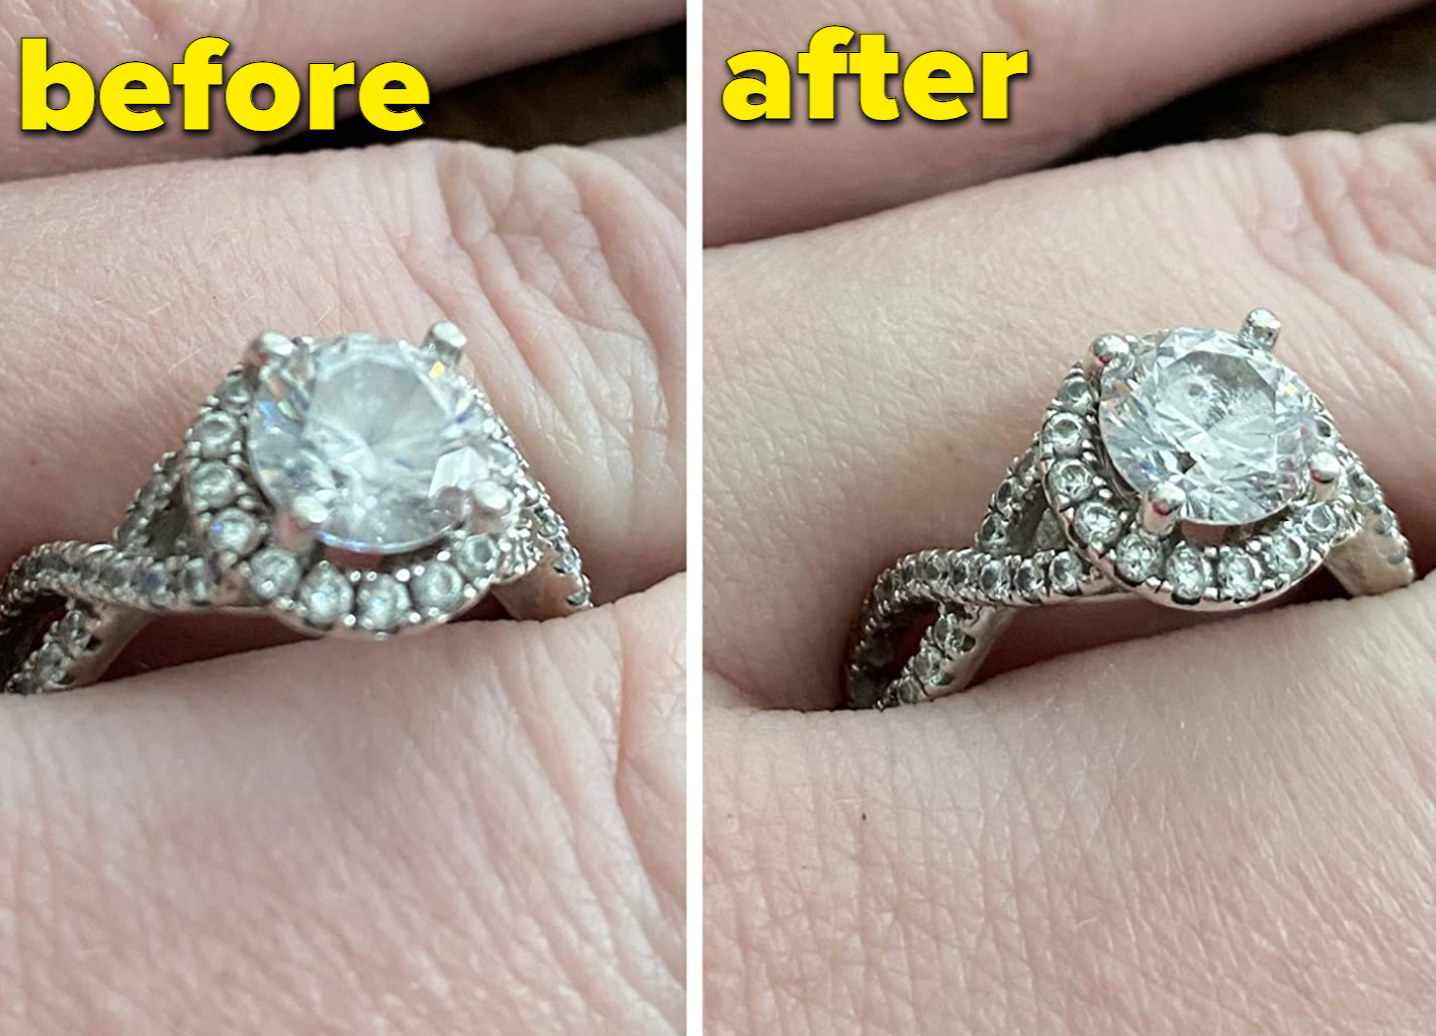 a reviewer's diamond ring looking fogged up and then looking brand new after using the cleaning pen